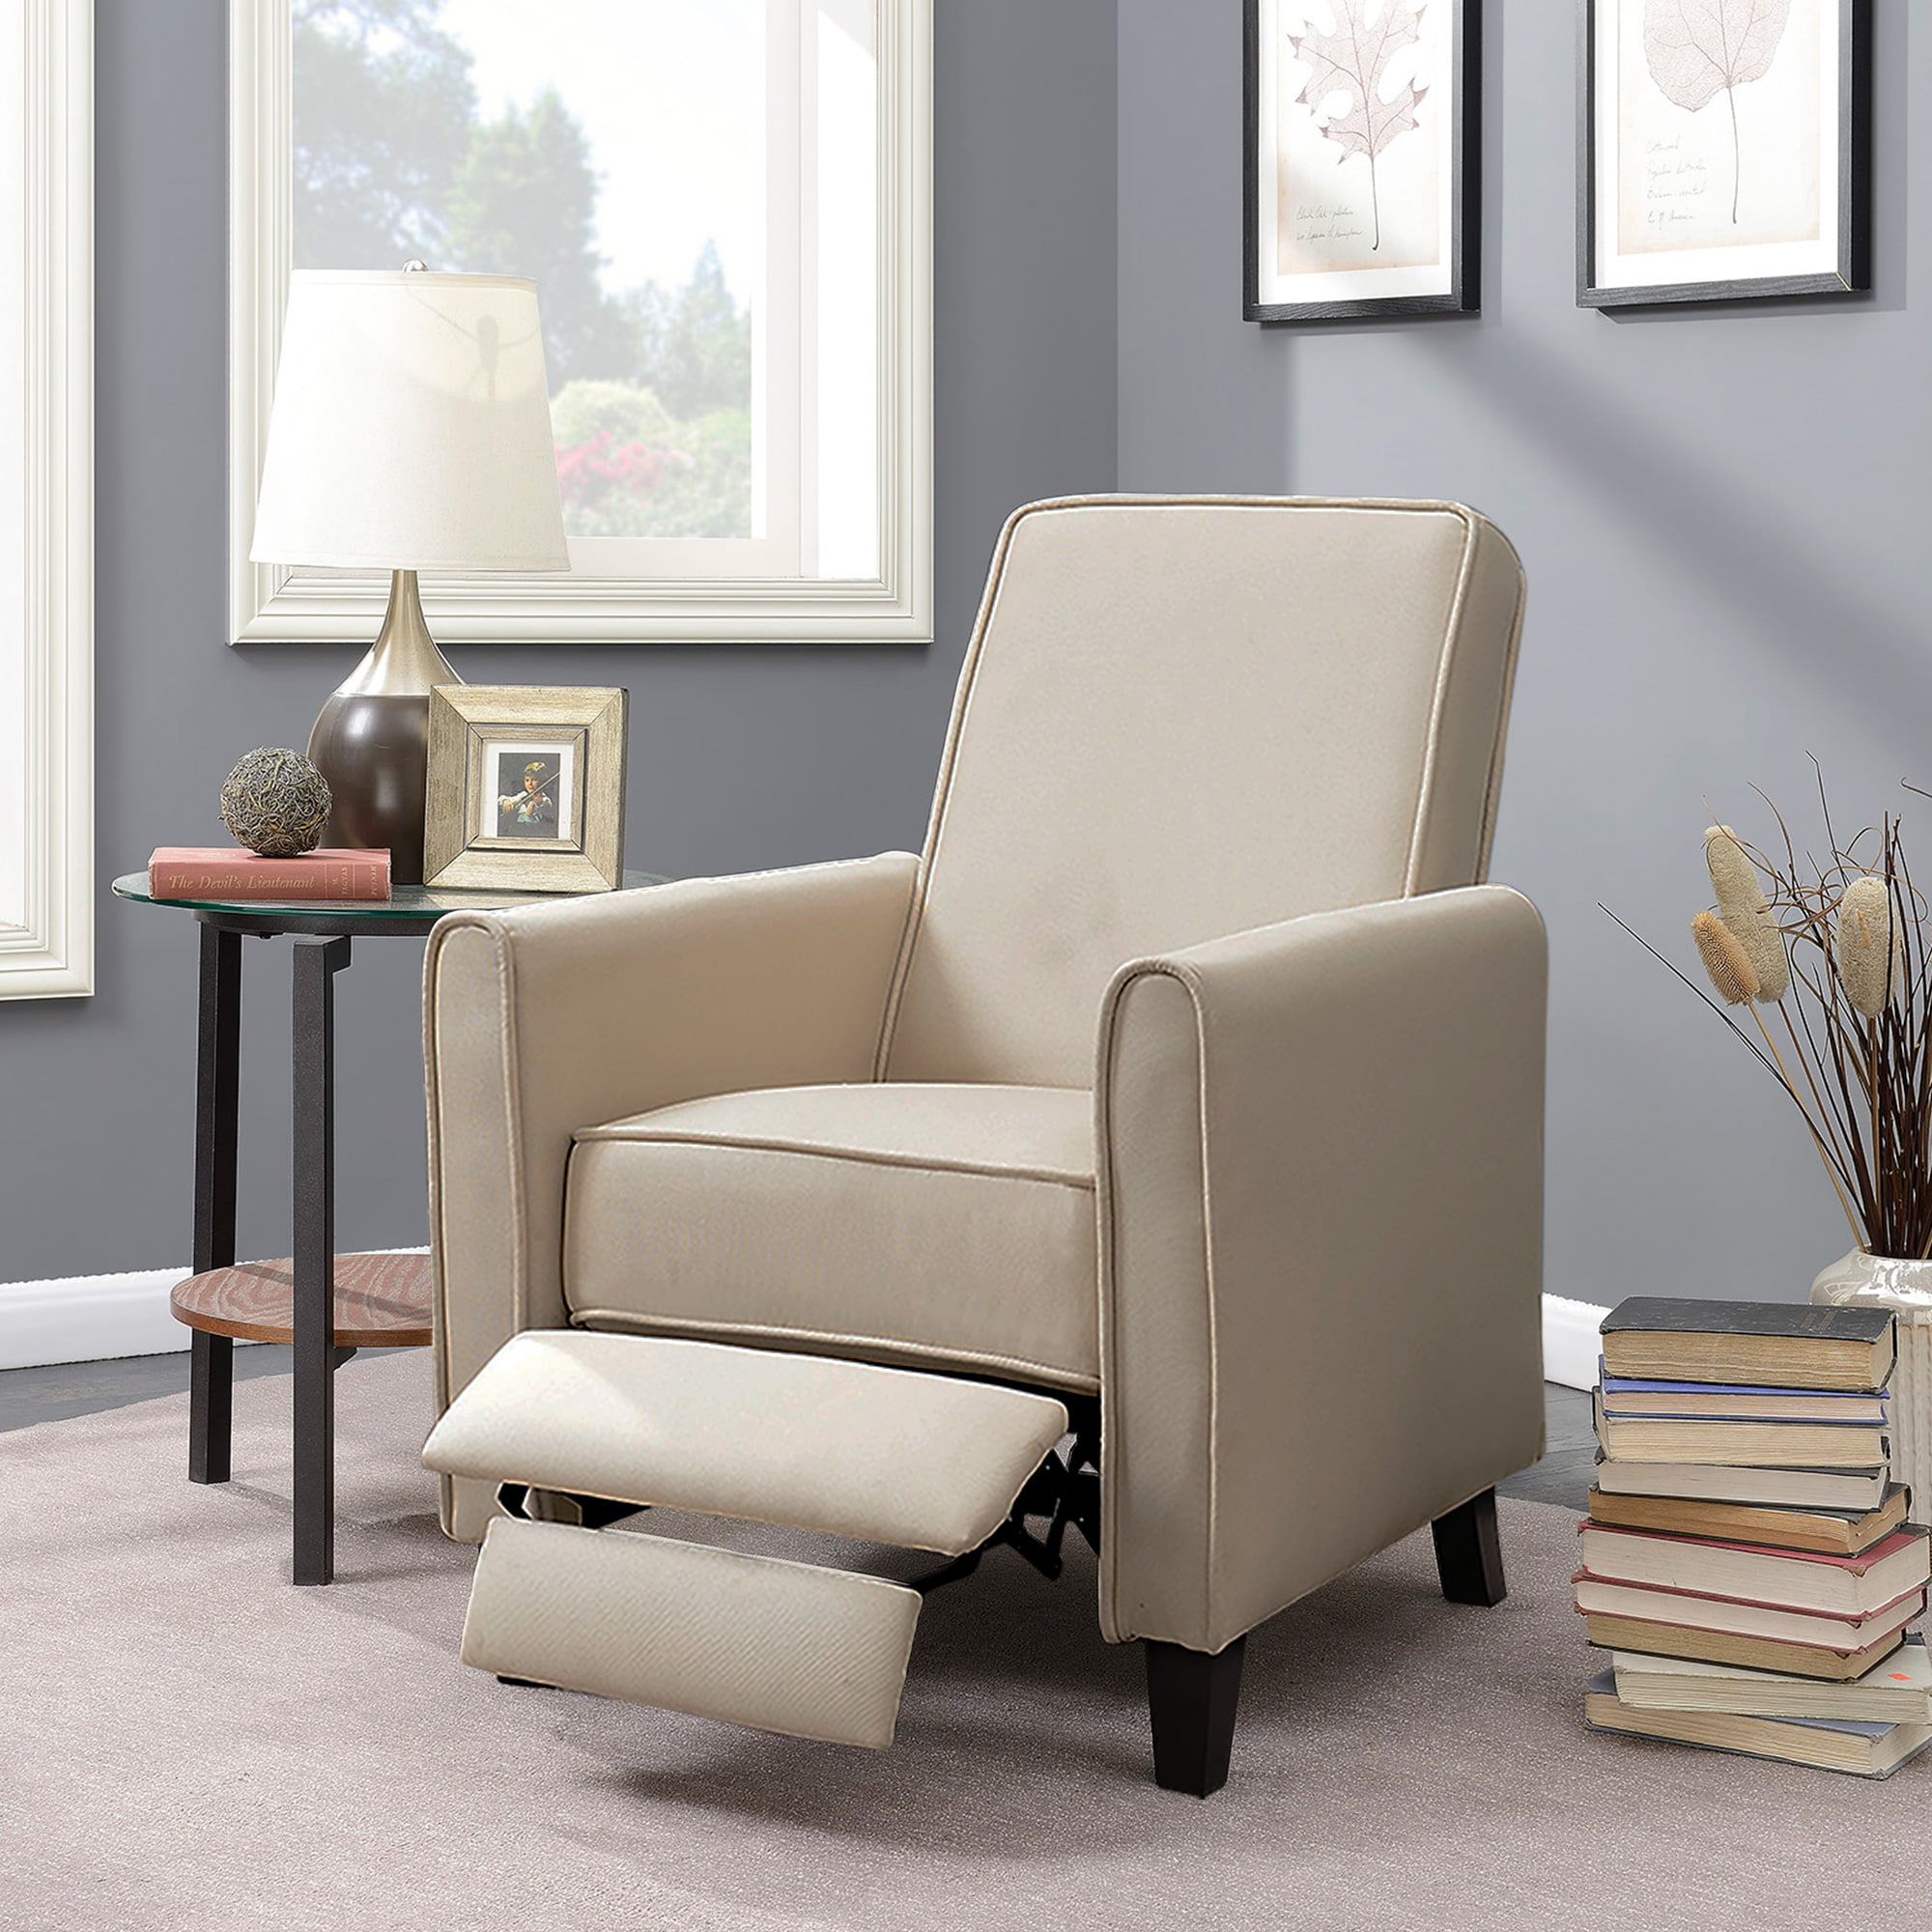 Belleze Modern Living Room Furniture, Leather Recliner Club Chair